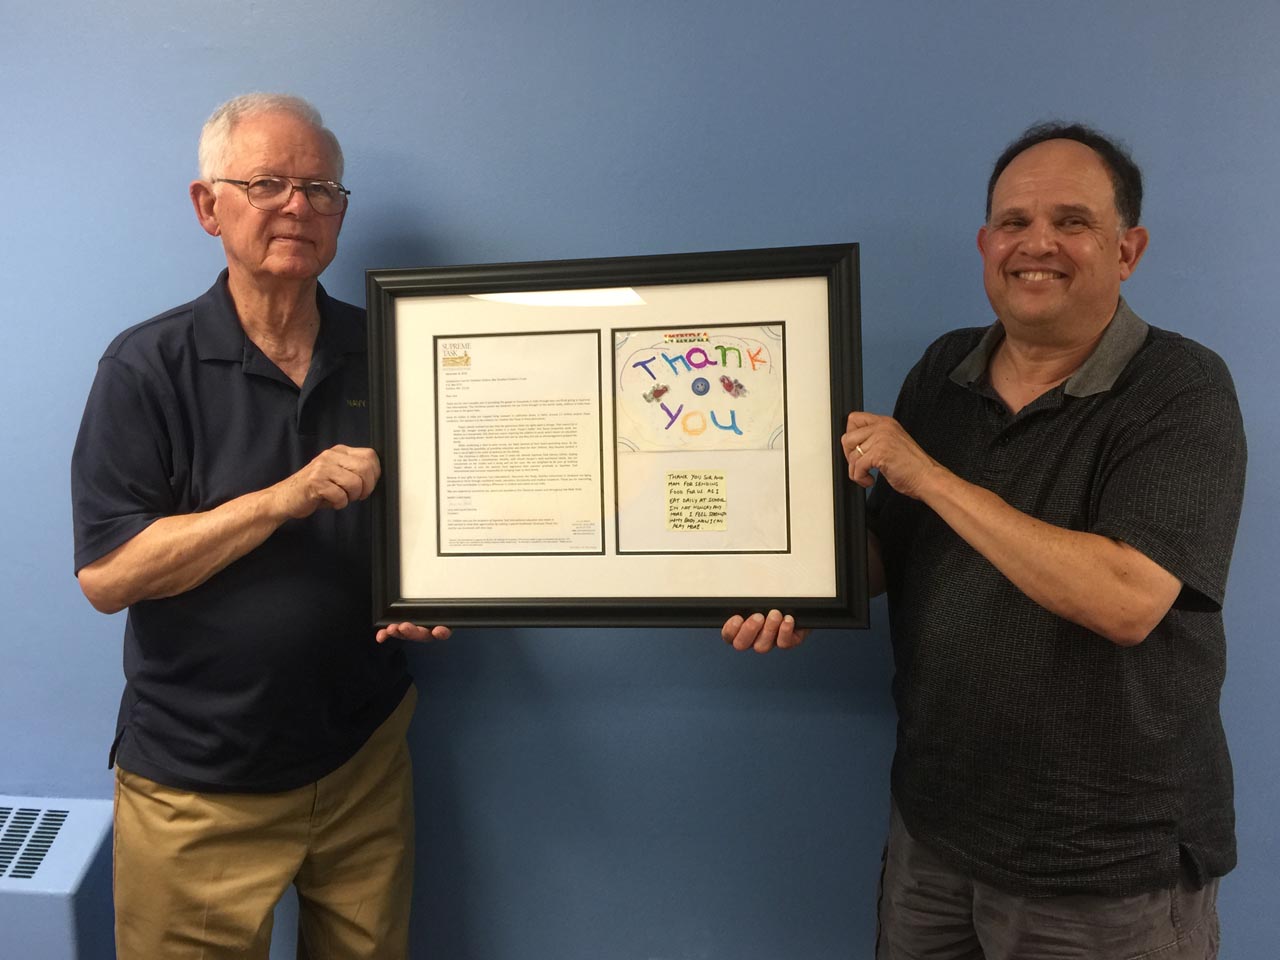 Honoring DCF Board President Jerry Nelson as he transitioned to President Emeritus. The plaque was prepared by Good Life Ministries (GLM), with a LOT of involvement and help from Rebecca Joy Leid.